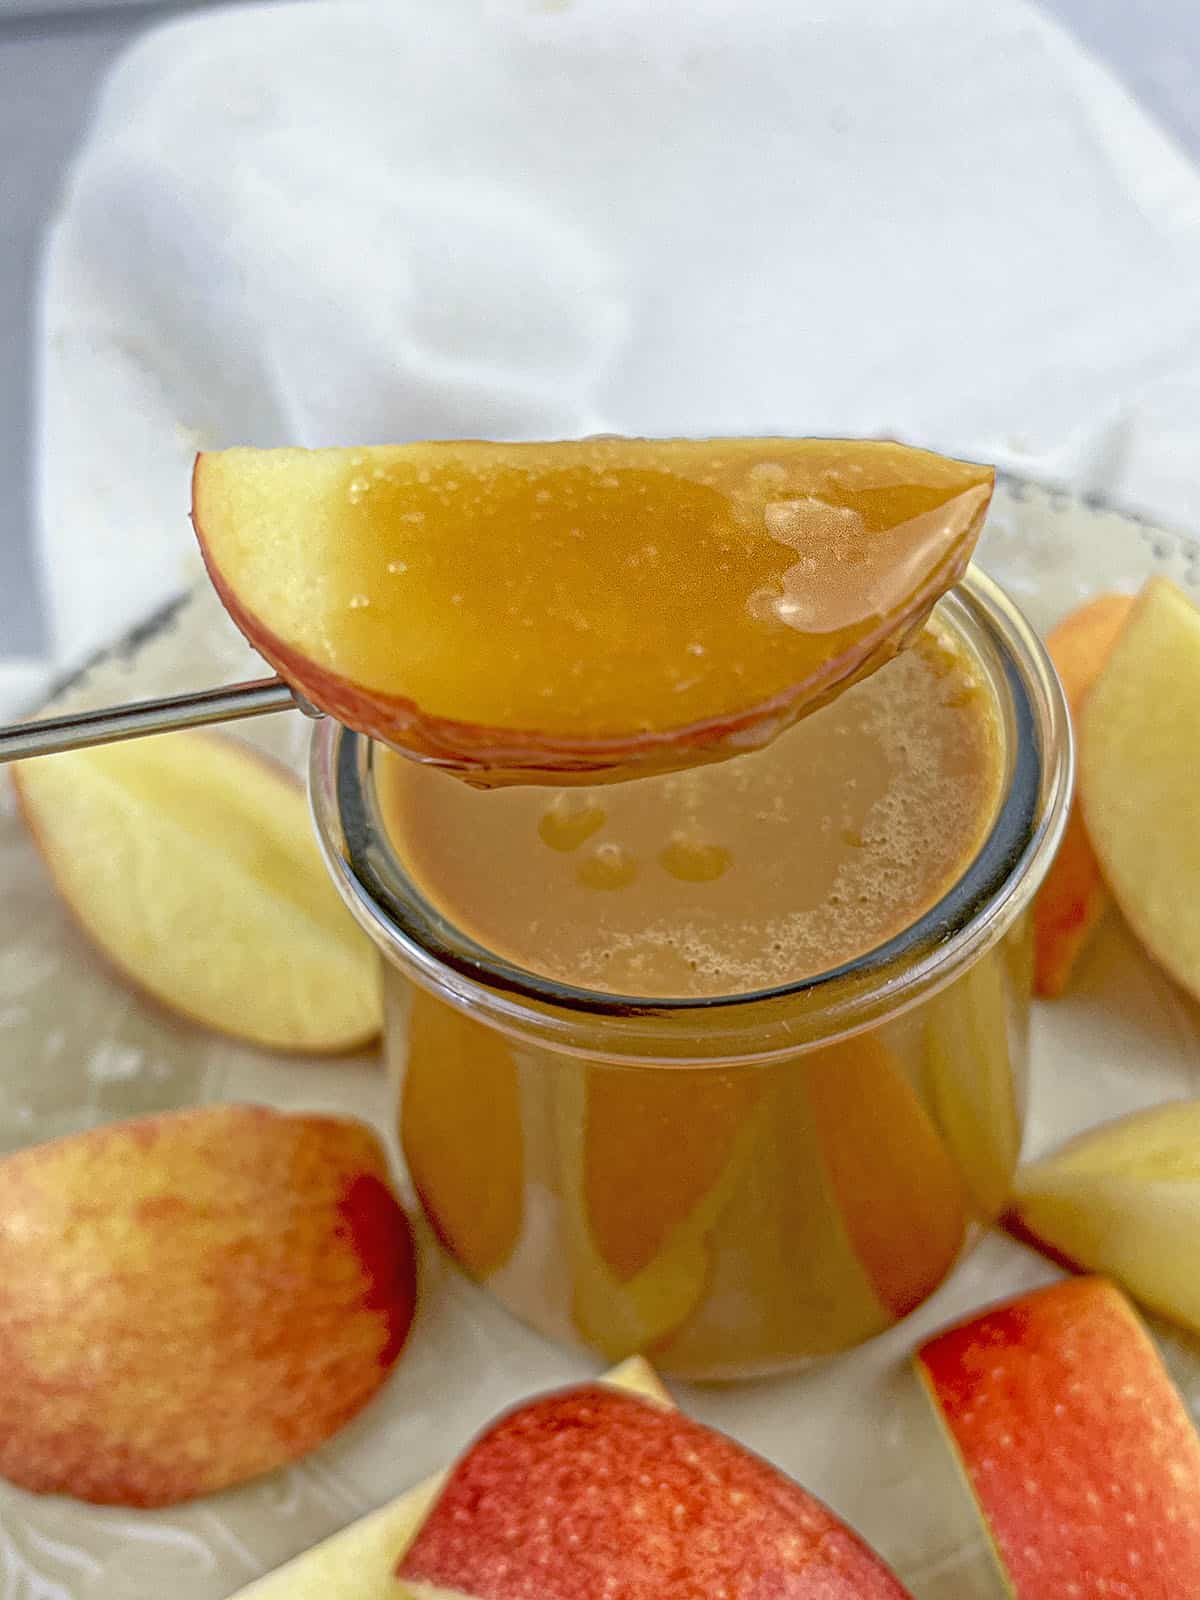 A slice of apple that has been dipped in the caramel, hovering above the jar of caramel.